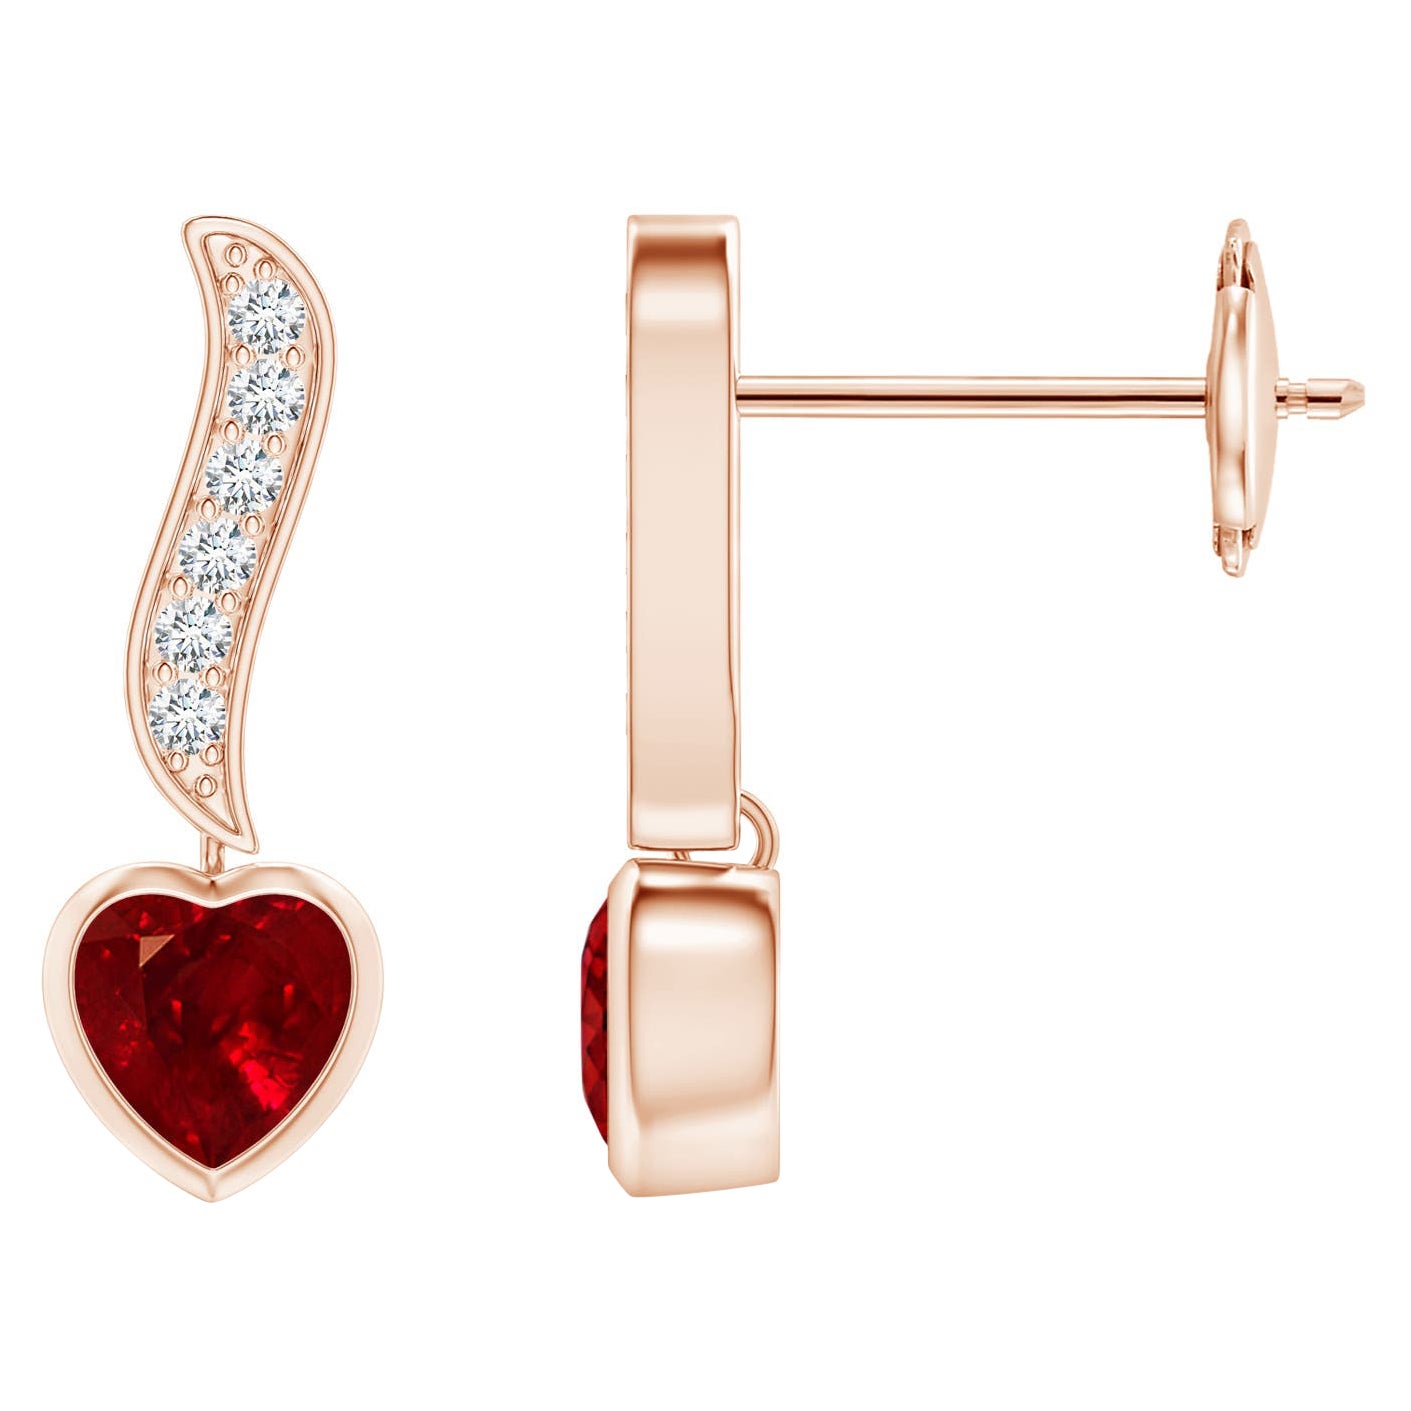 Natural Heart-Shaped 0.68ct Ruby and Diamond Drop Earrings in 14K Rose Gold